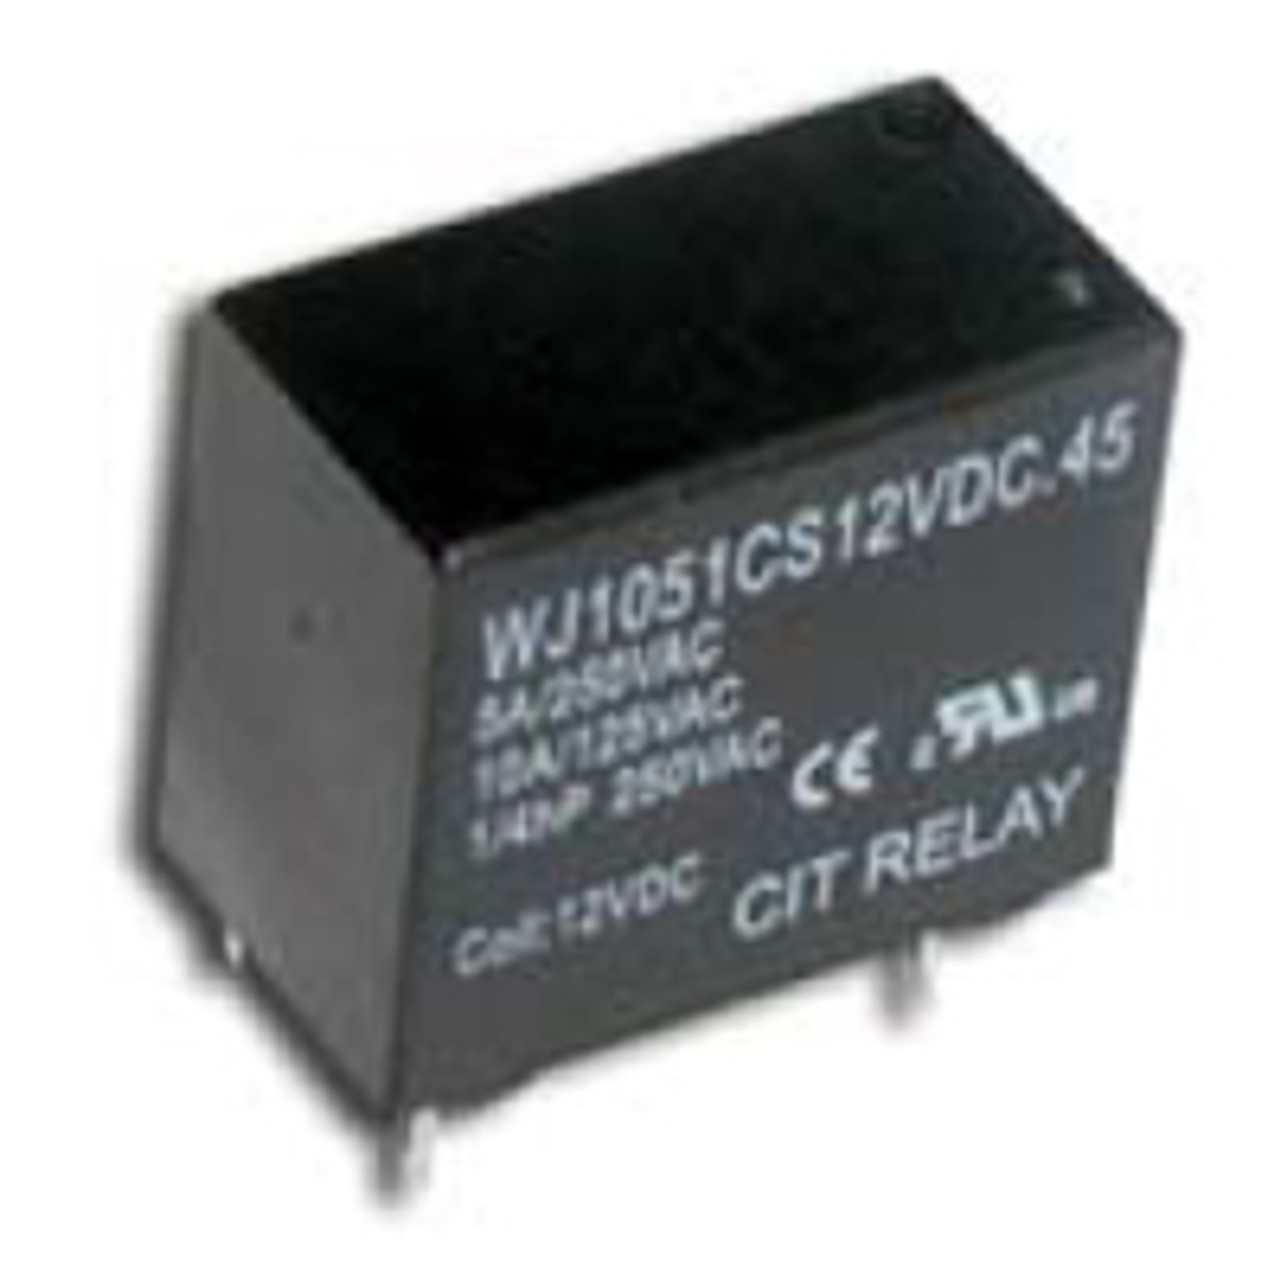 CIT Relay and Switch J1051A24VDC.20 General Purpose Relays